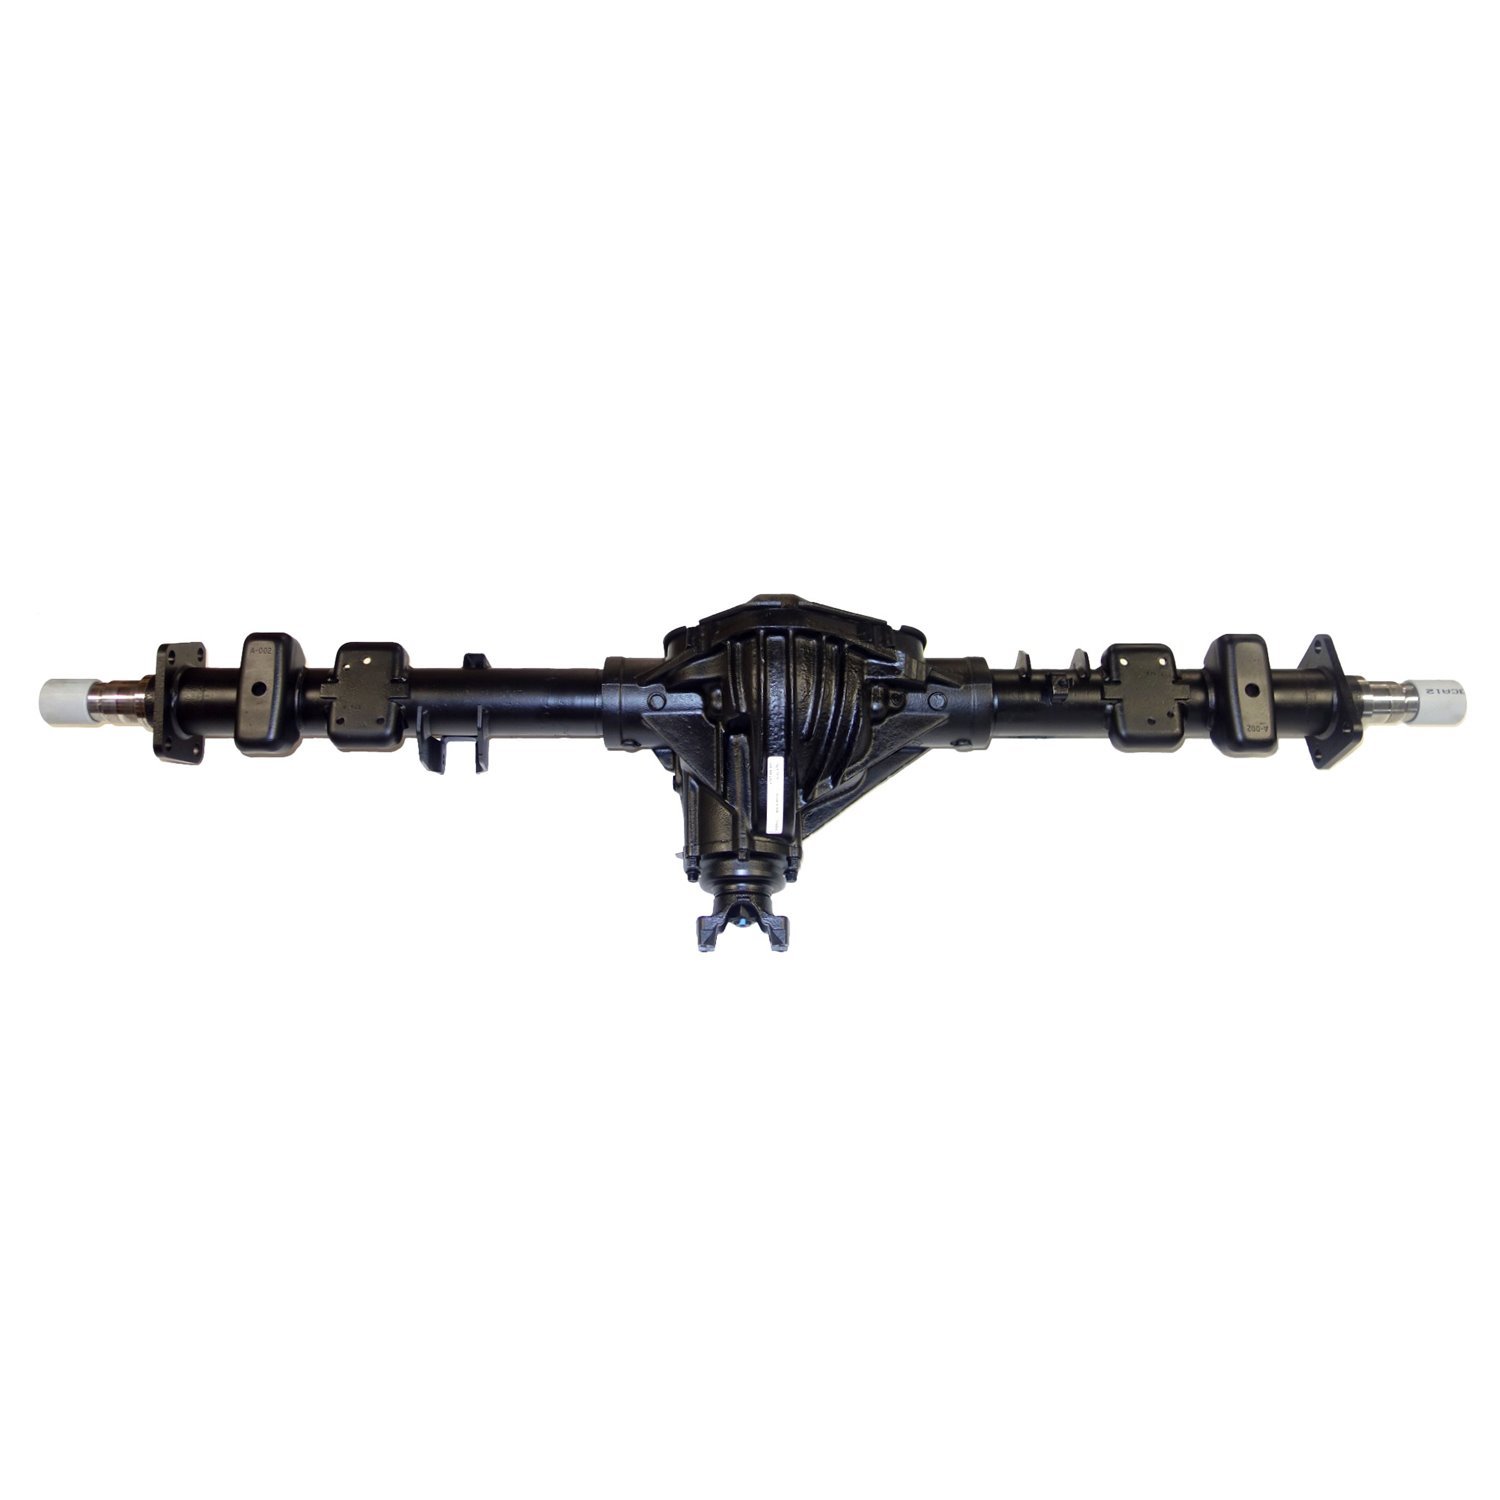 Remanufactured Axle Assembly for GM 14 Bolt Truck 1996-02 GM Van 2500, 3.73 Ratio, Open